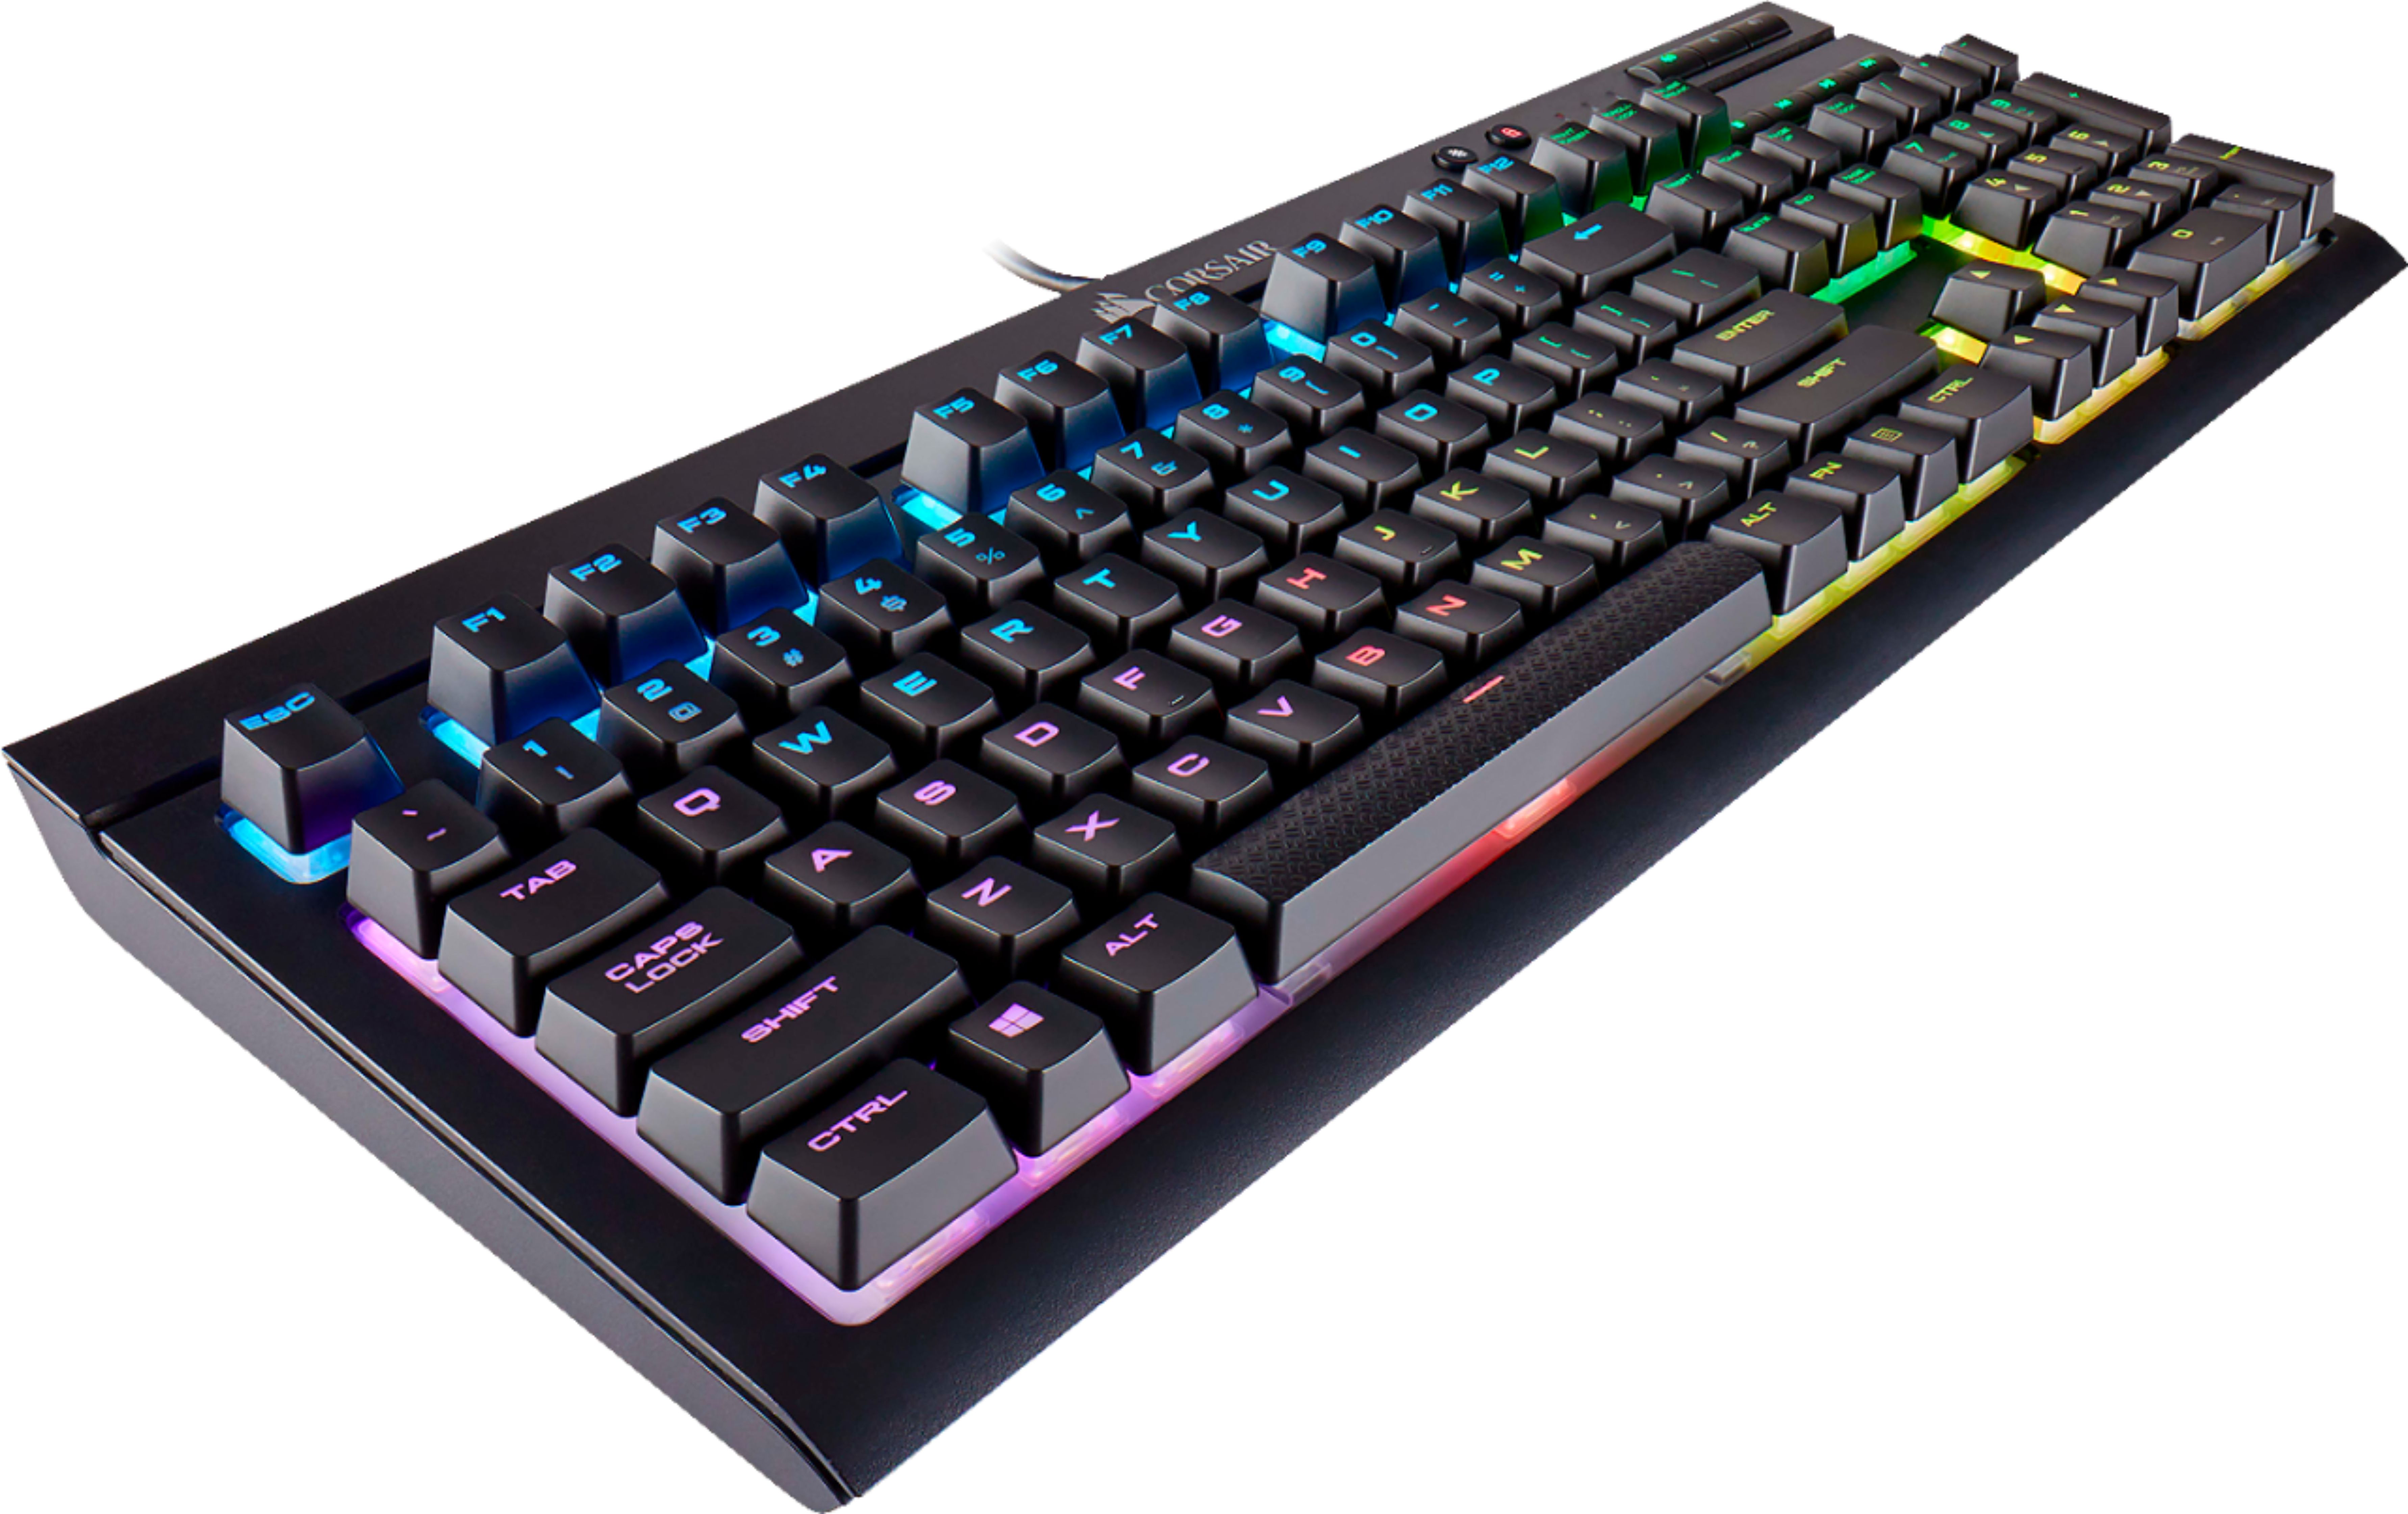 Best Buy: CORSAIR K68 Wired Gaming Mechanical Cherry MX Red Keyboard with RGB Backlighting Black CH-9102010-NA